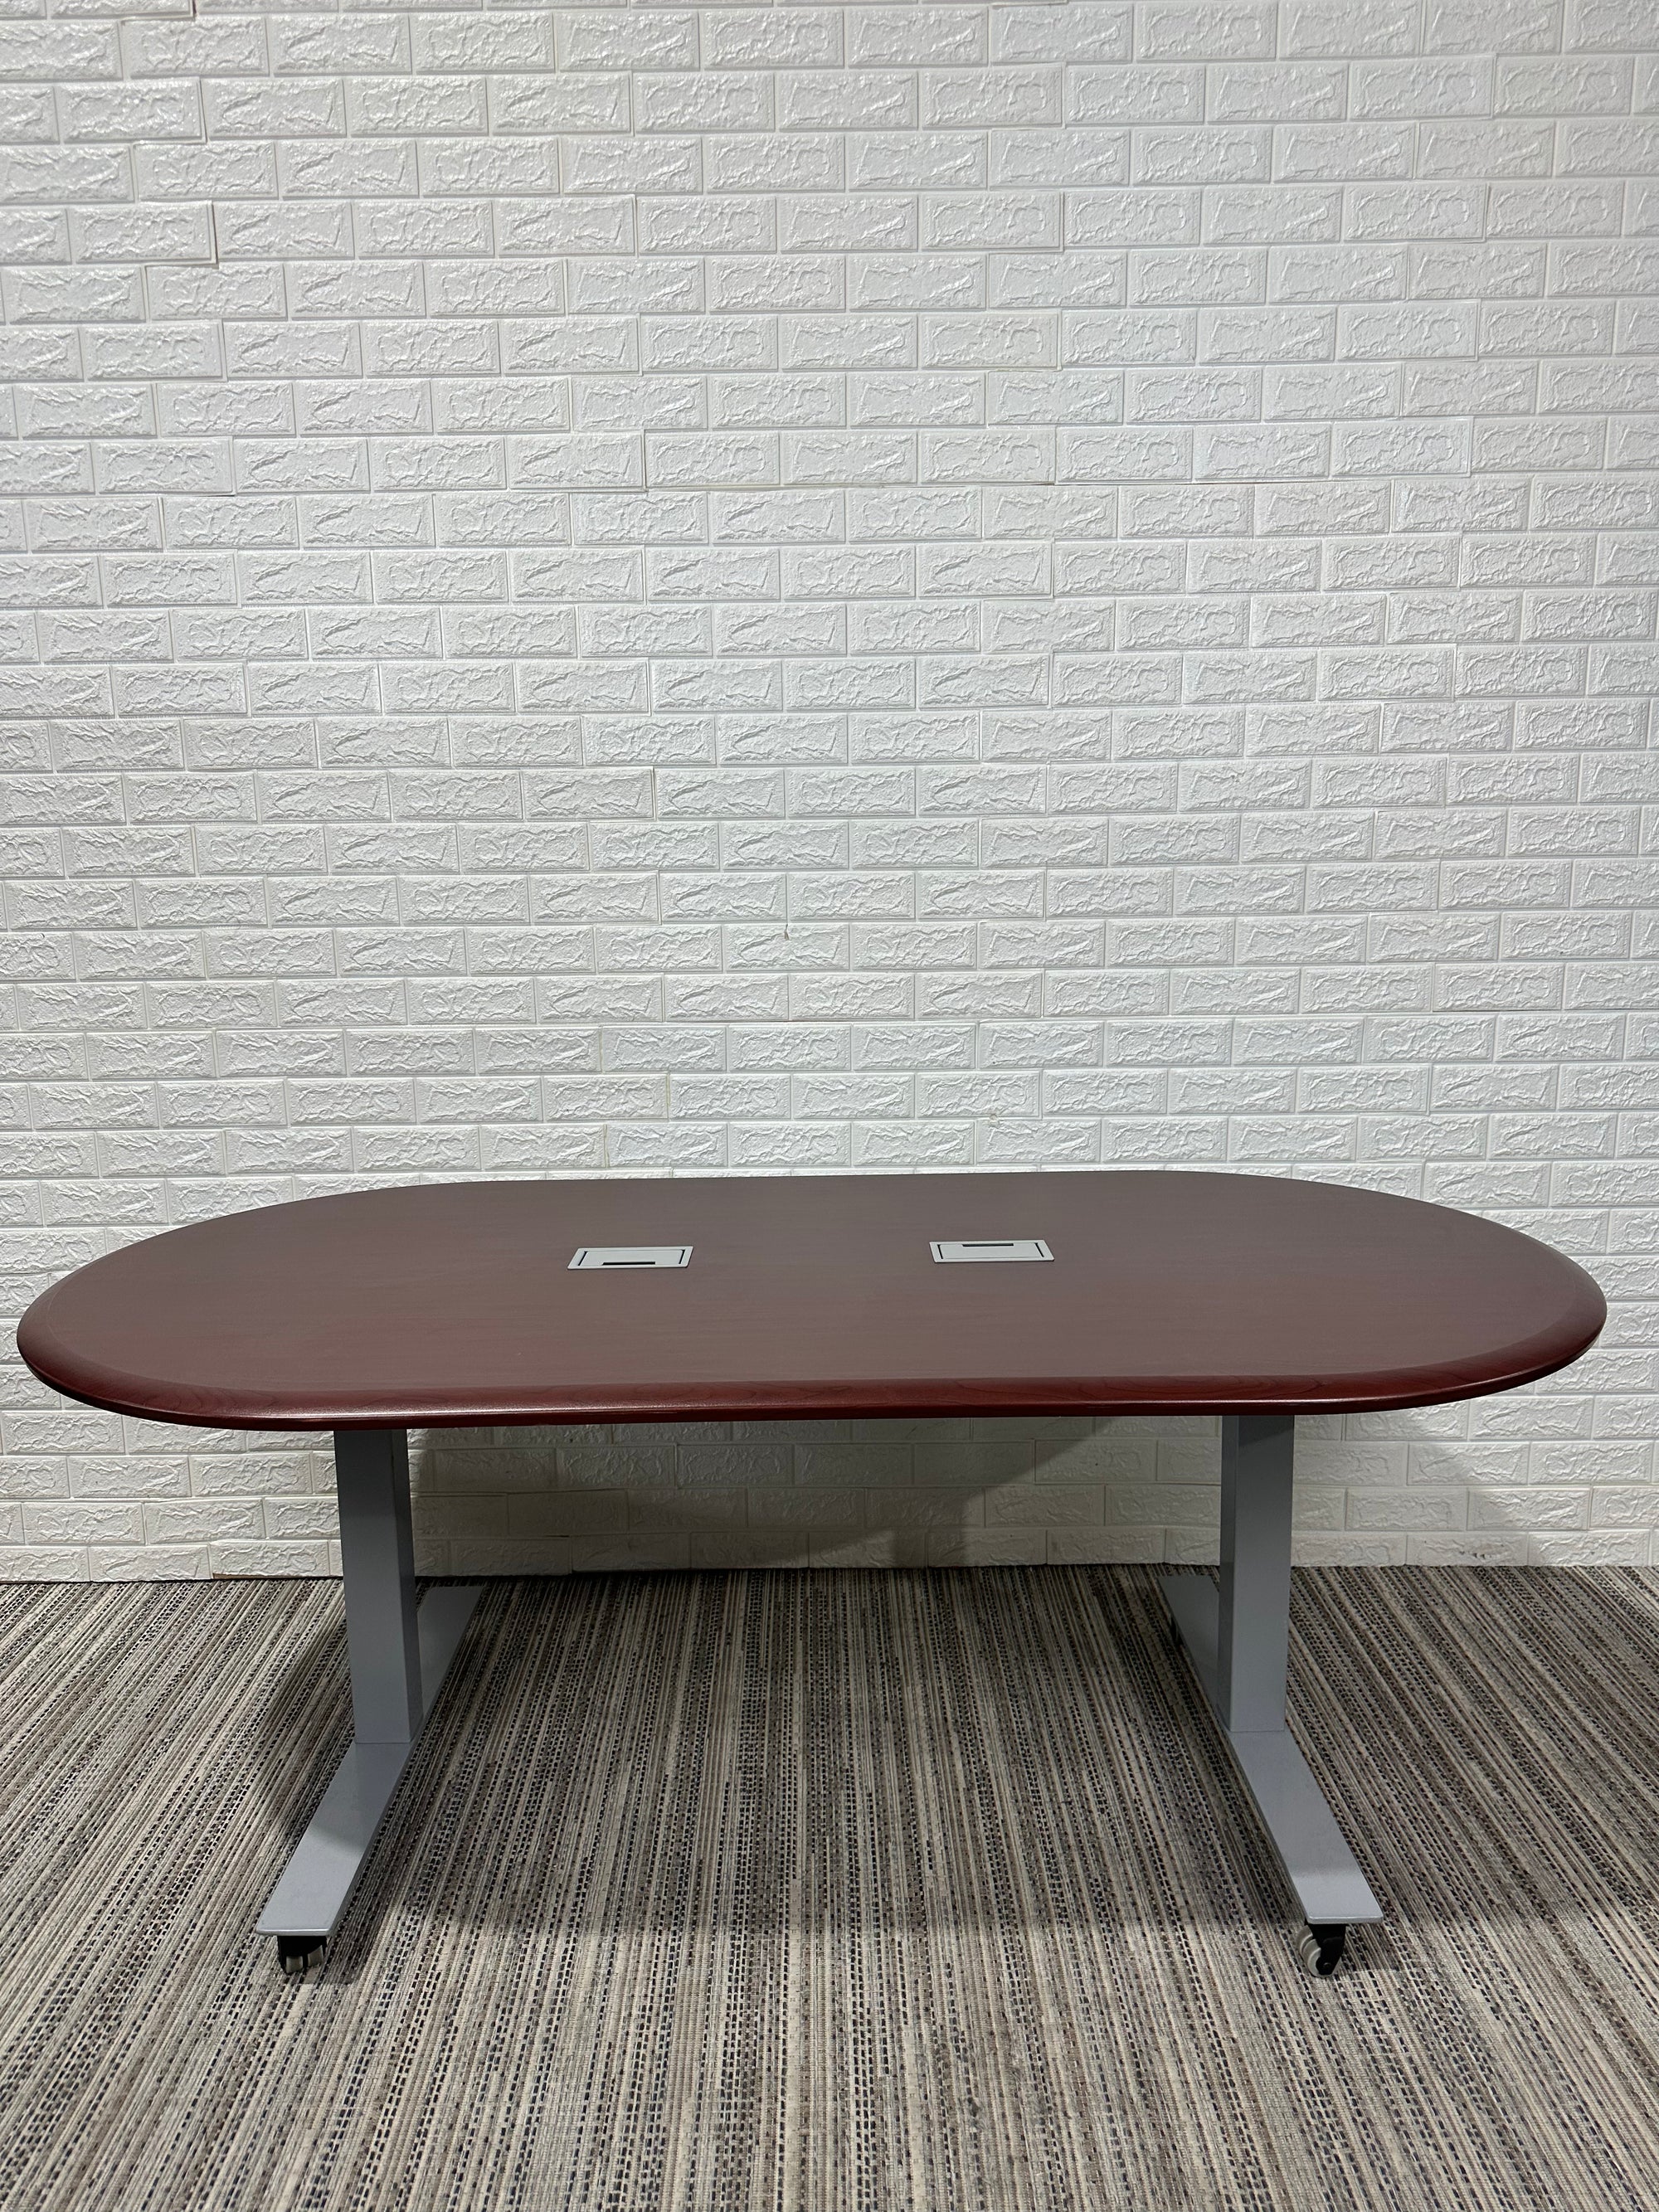 Pre-Owned iMovR Red Wood Conference Table - Duckys Office Furniture